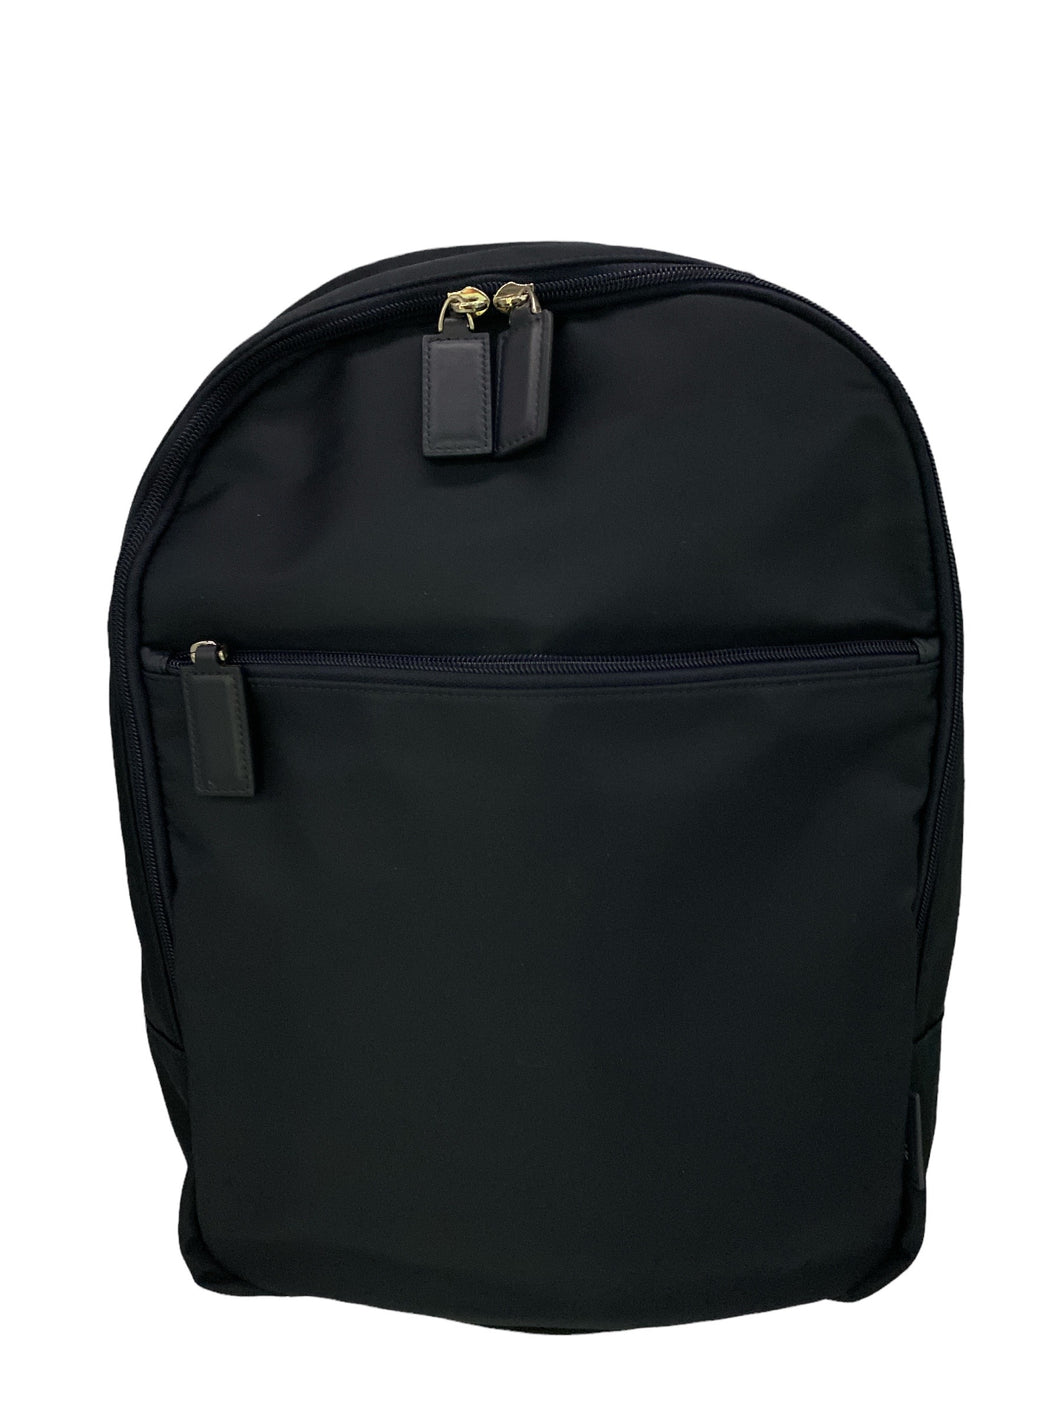 NEW Bally Taff Men's 6216426 Dark Navy Fabric & Leather Backpack MSRP $499